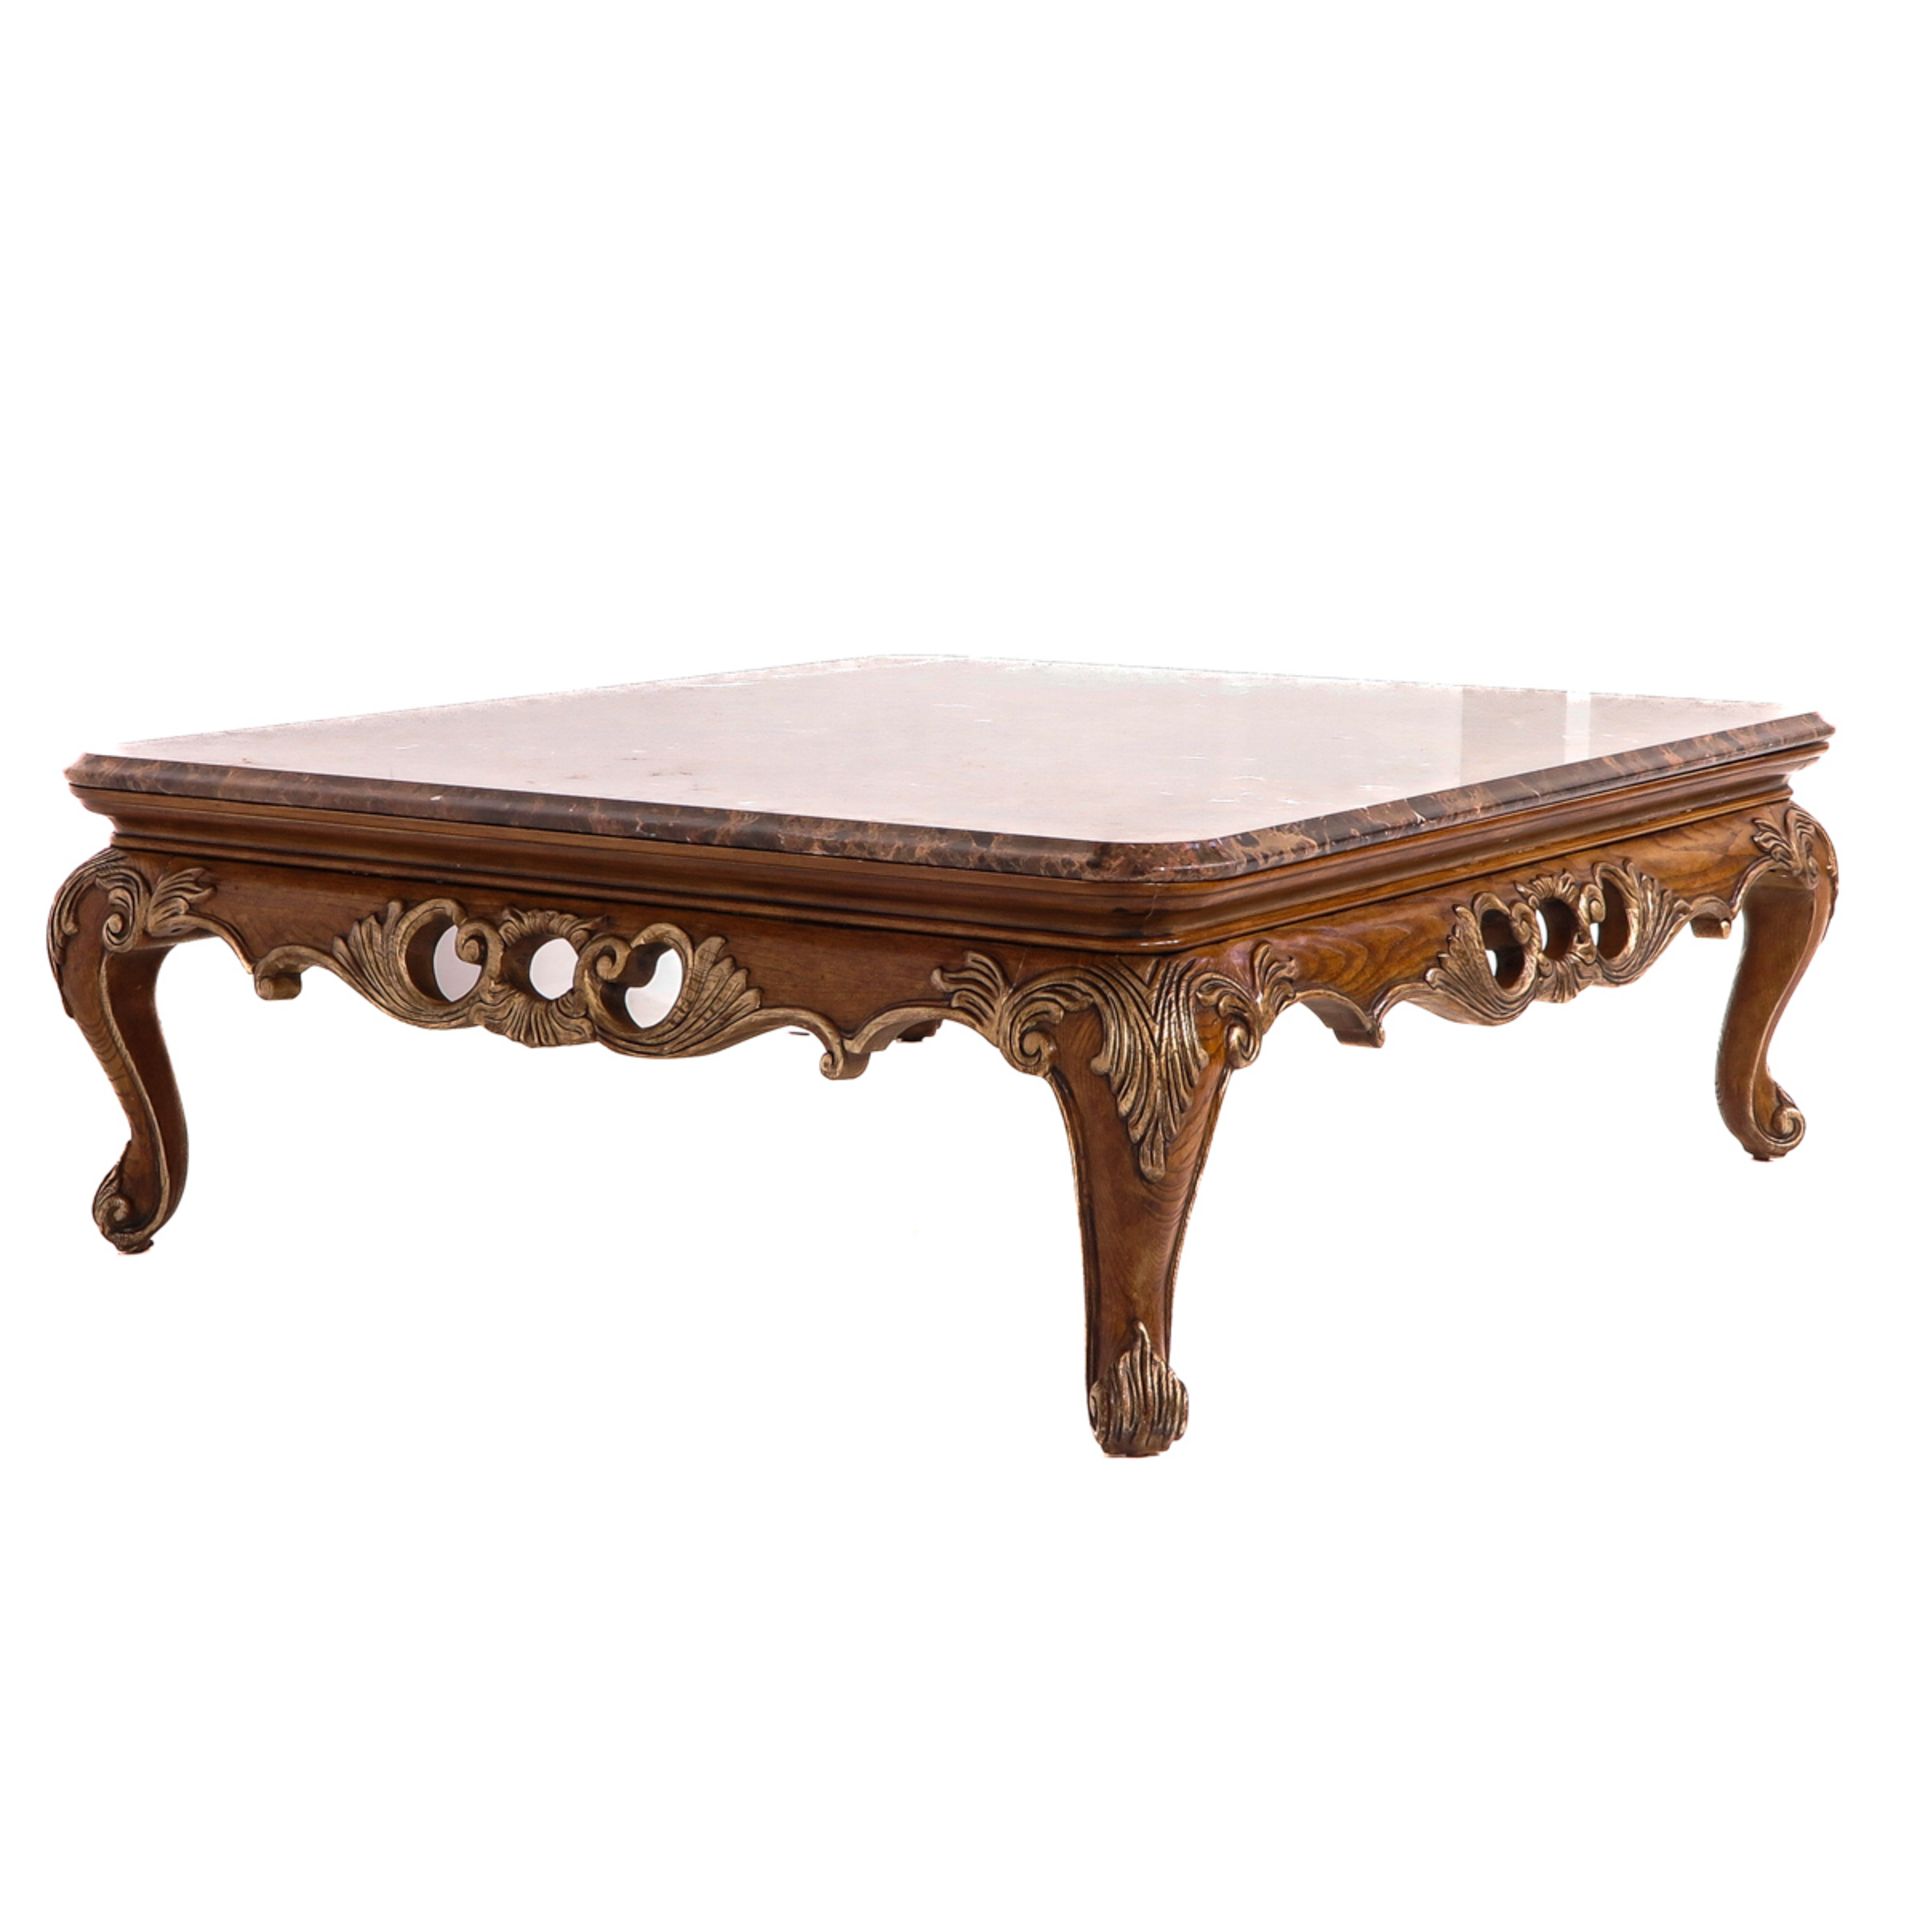 A Marble Top Coffee table - Image 2 of 8